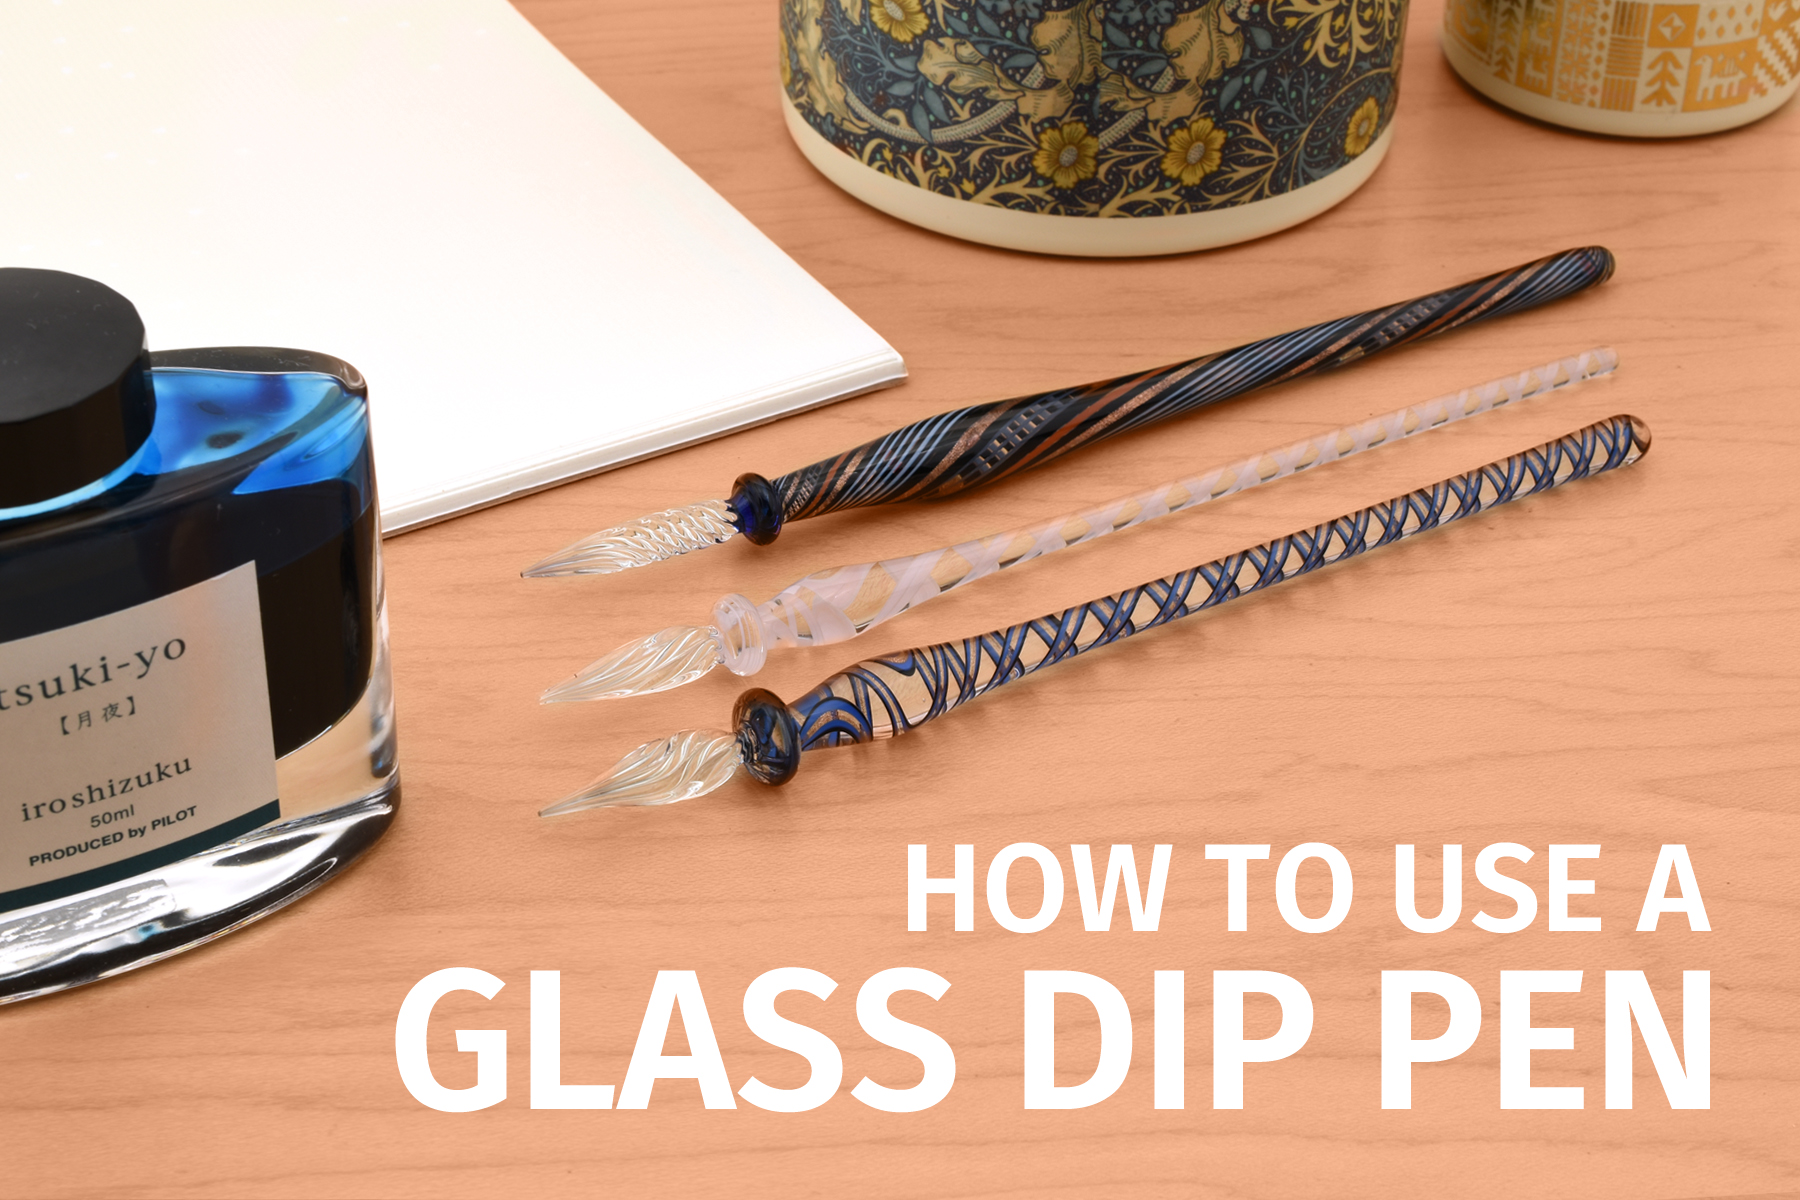 How to Use a Glass Dip Pen